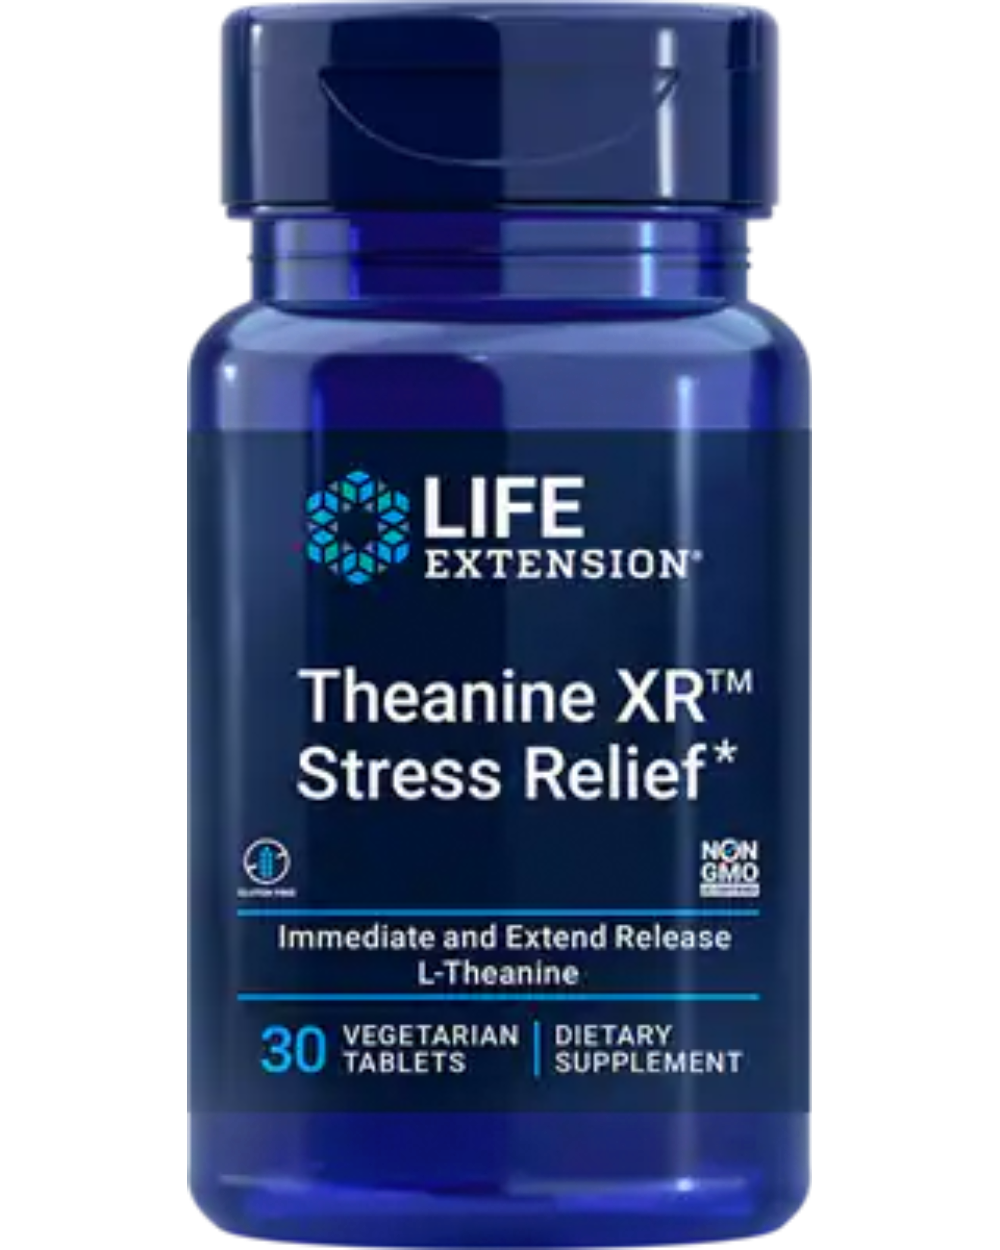 Theanine XR Stress Relief